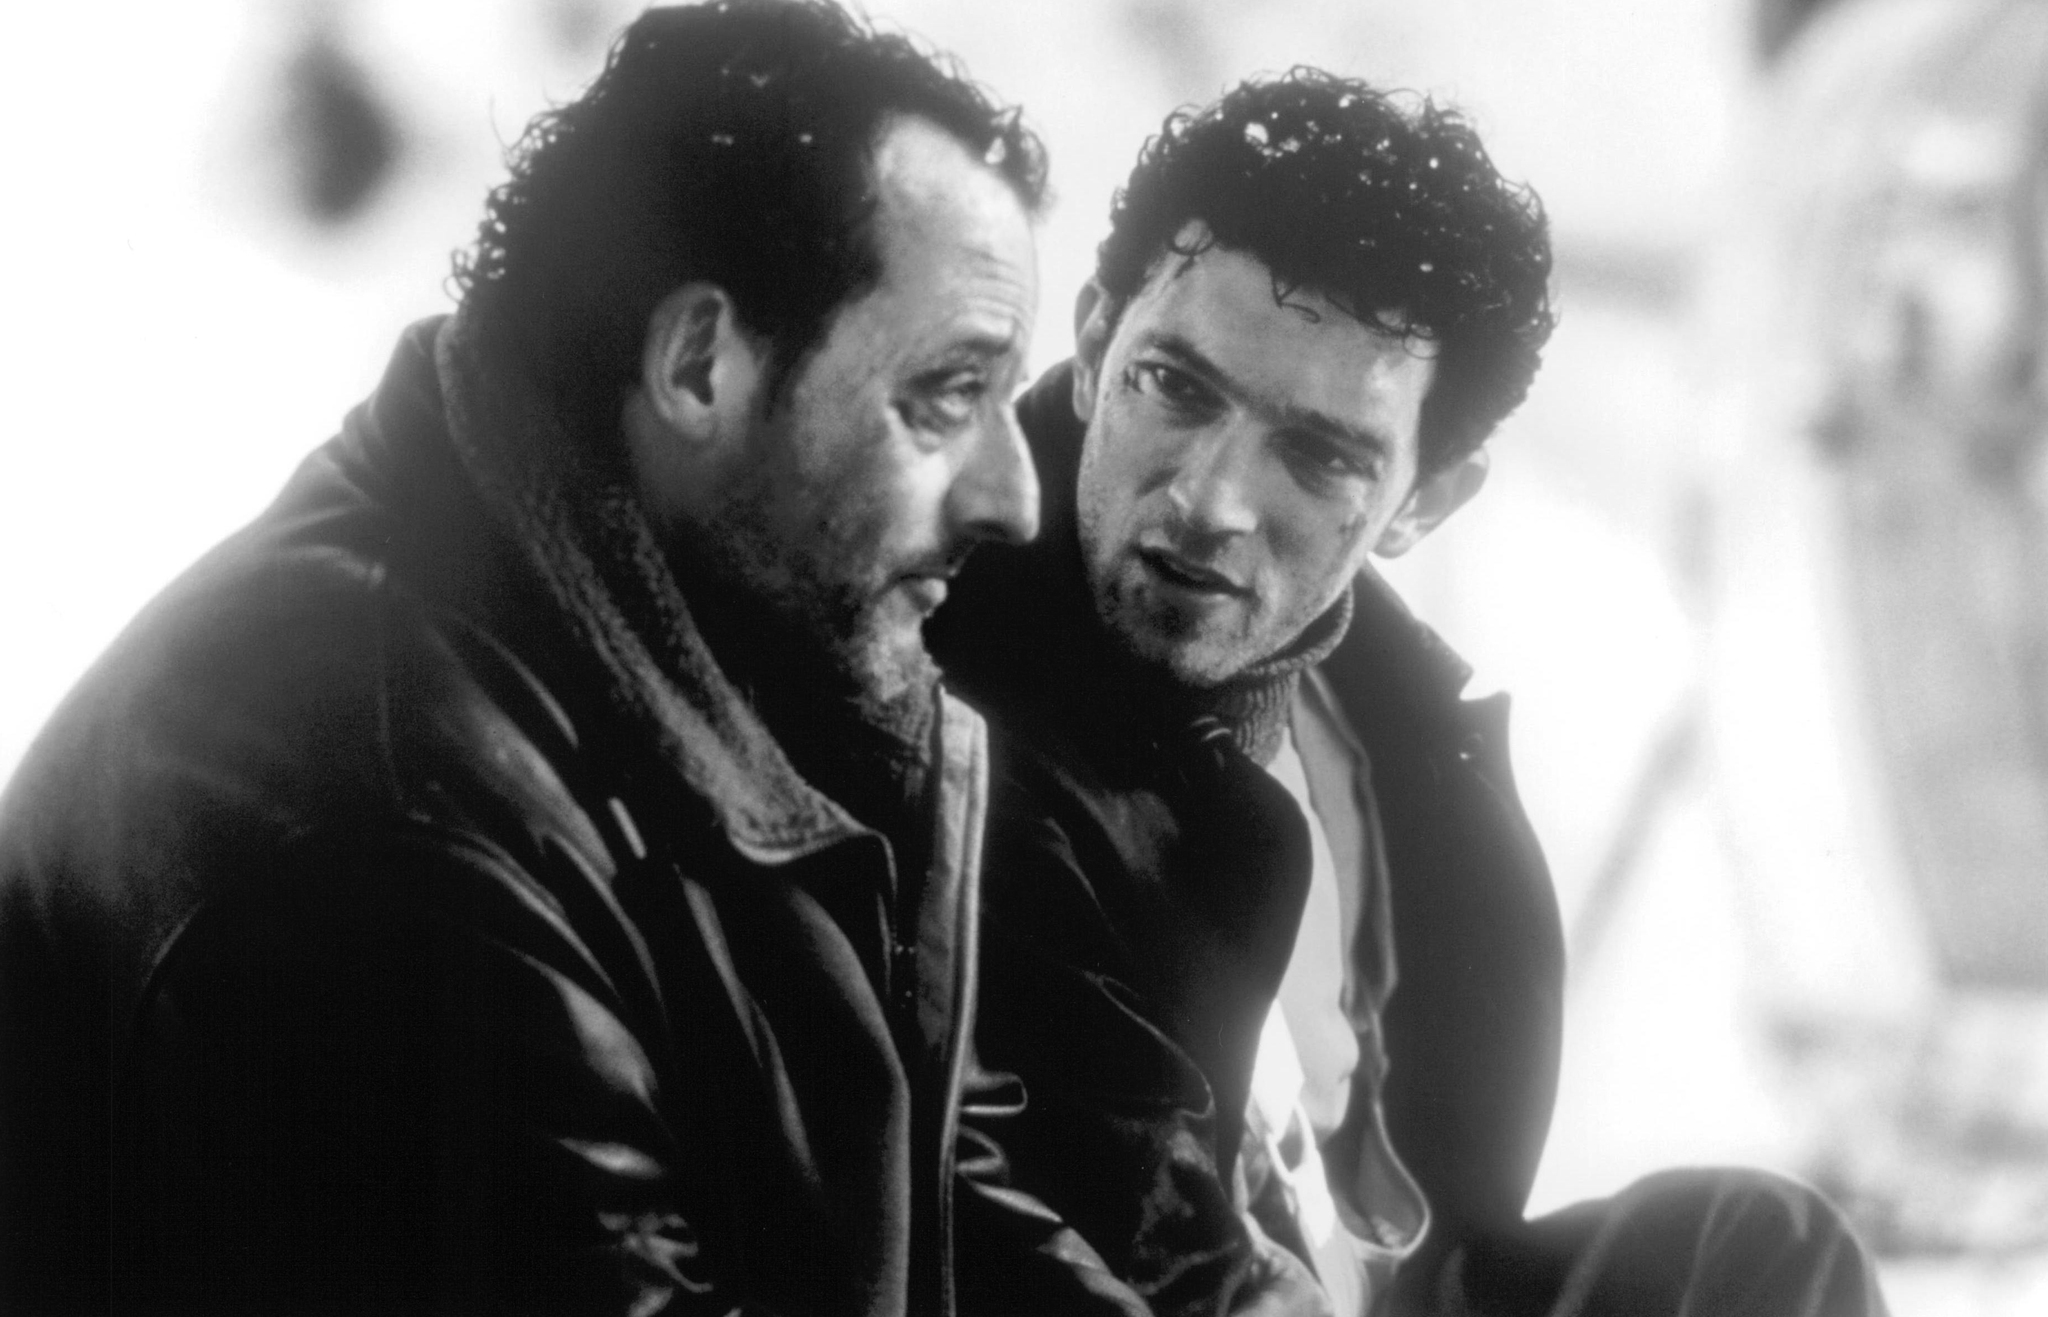 Still of Jean Reno and Vincent Cassel in Les rivières pourpres (2000)